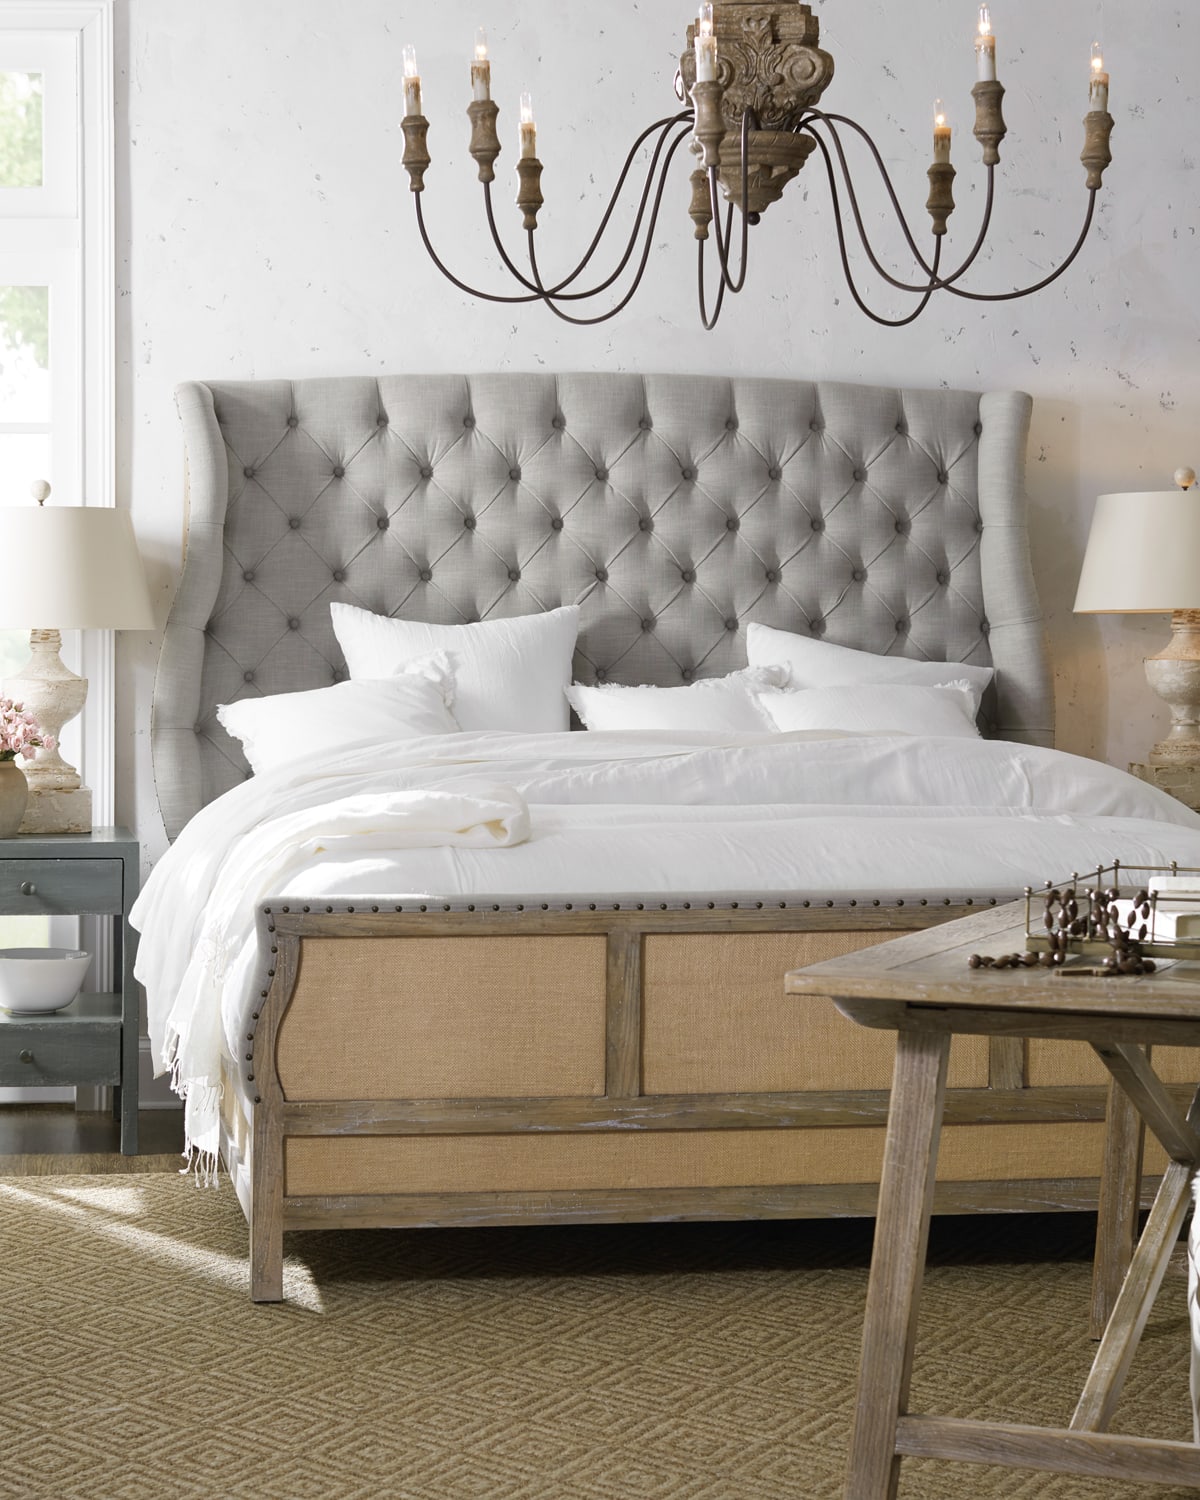 Hooker Furniture Bohemian Queen Tufted Shelter Bed In Light Gray